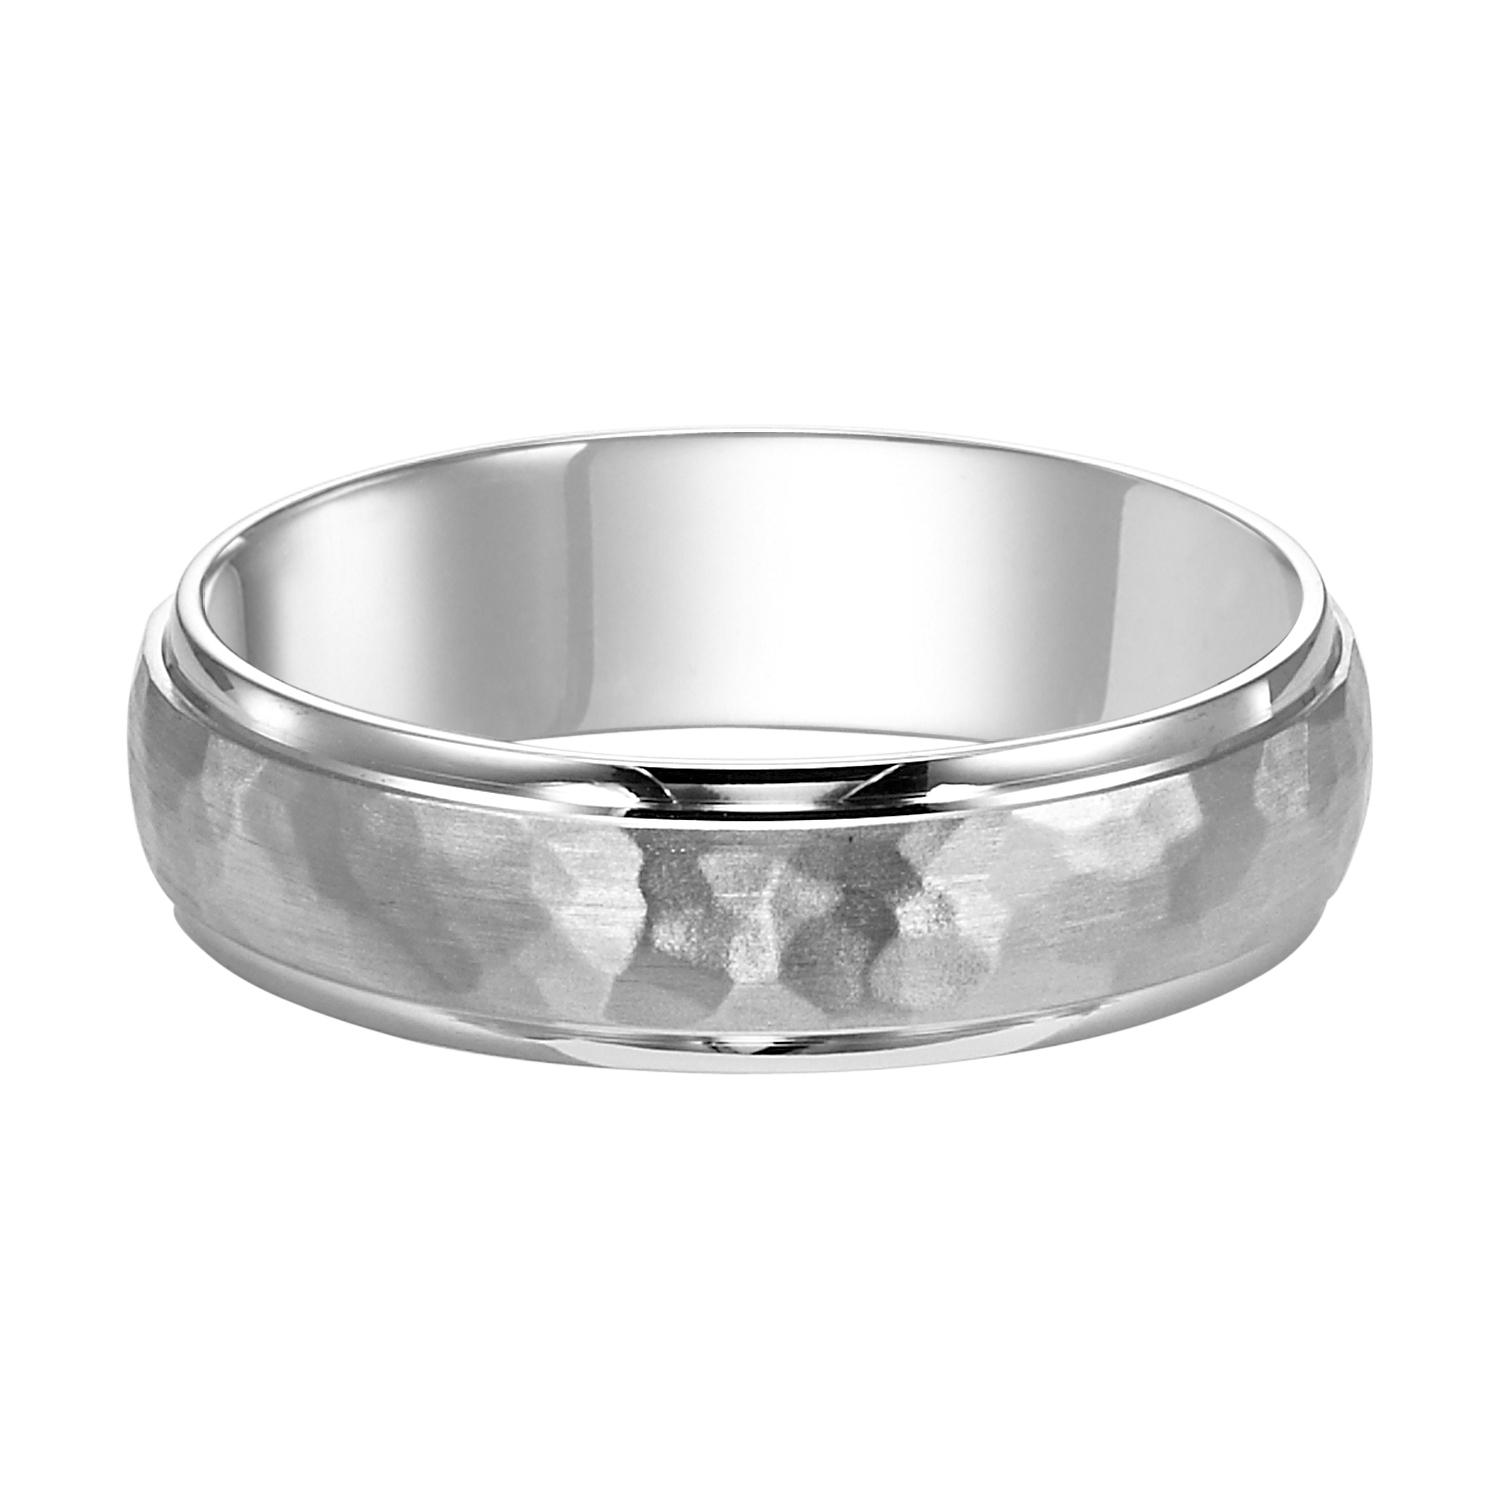 Gents 14K White Gold 6mm Wedding Band with Hammered Finish